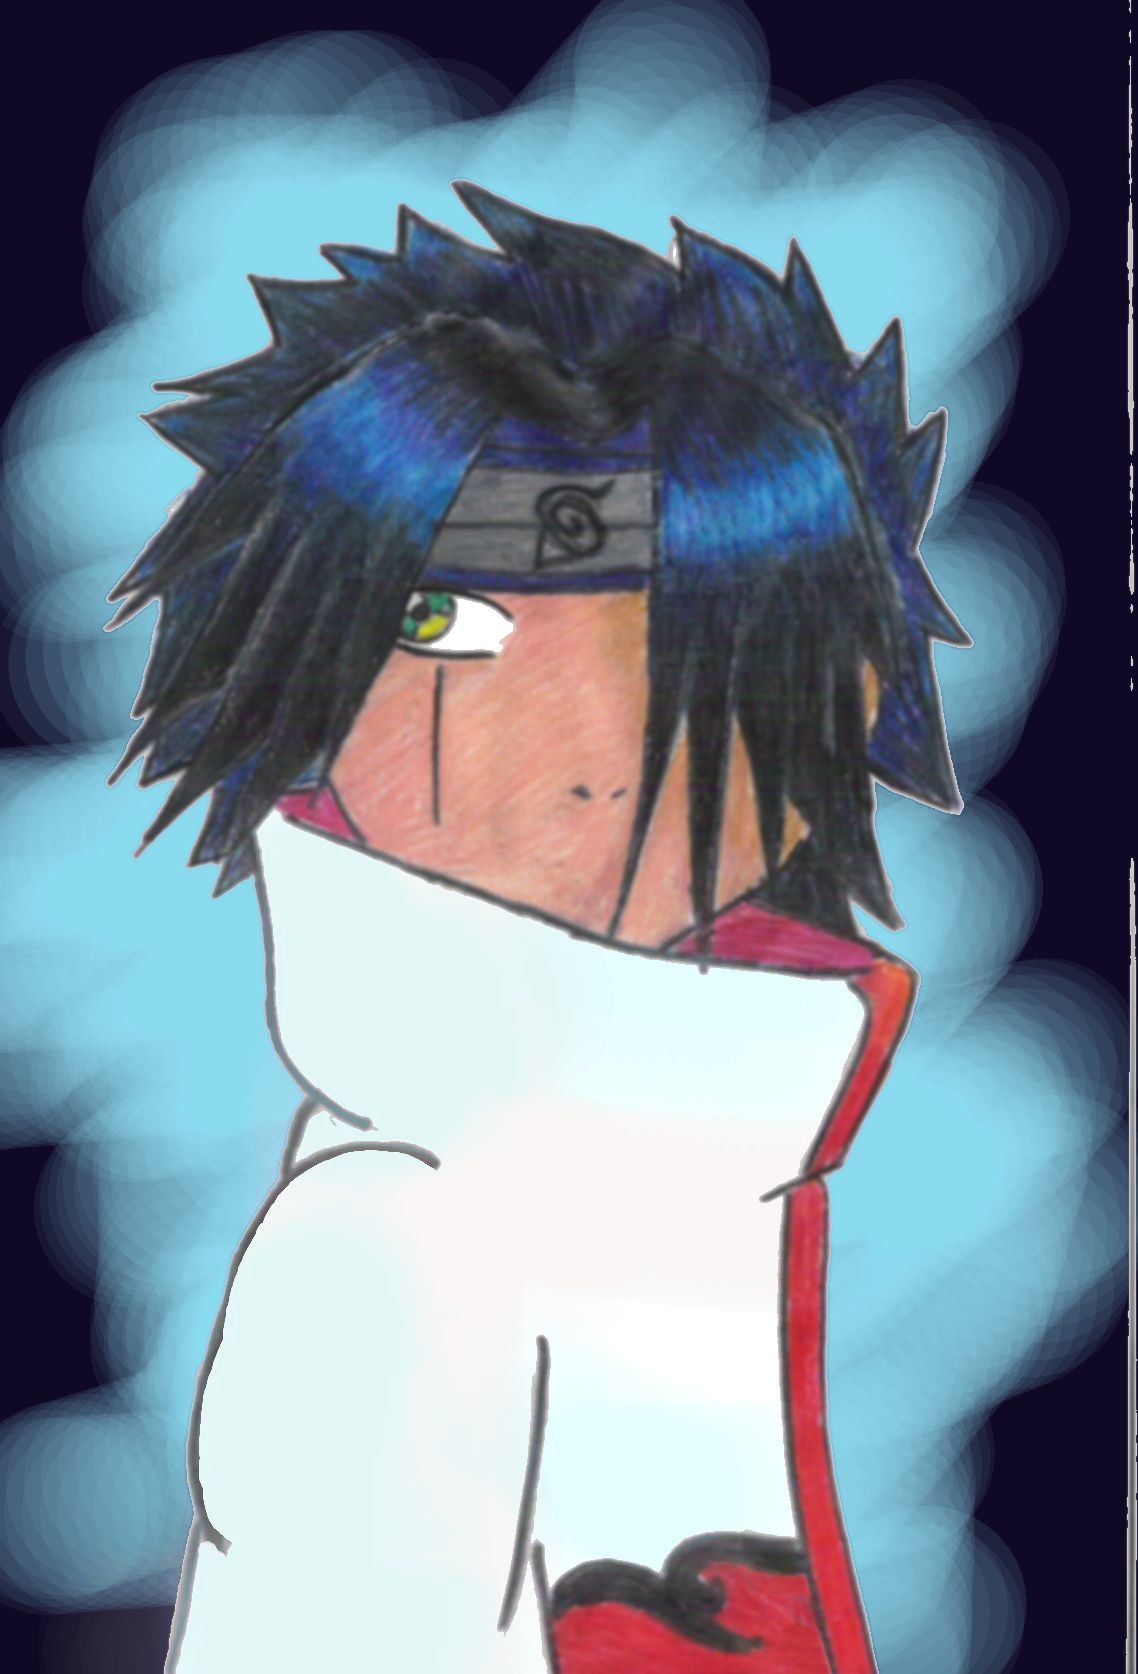 Sasukegurl's contest entry by Spike_Schinizzle